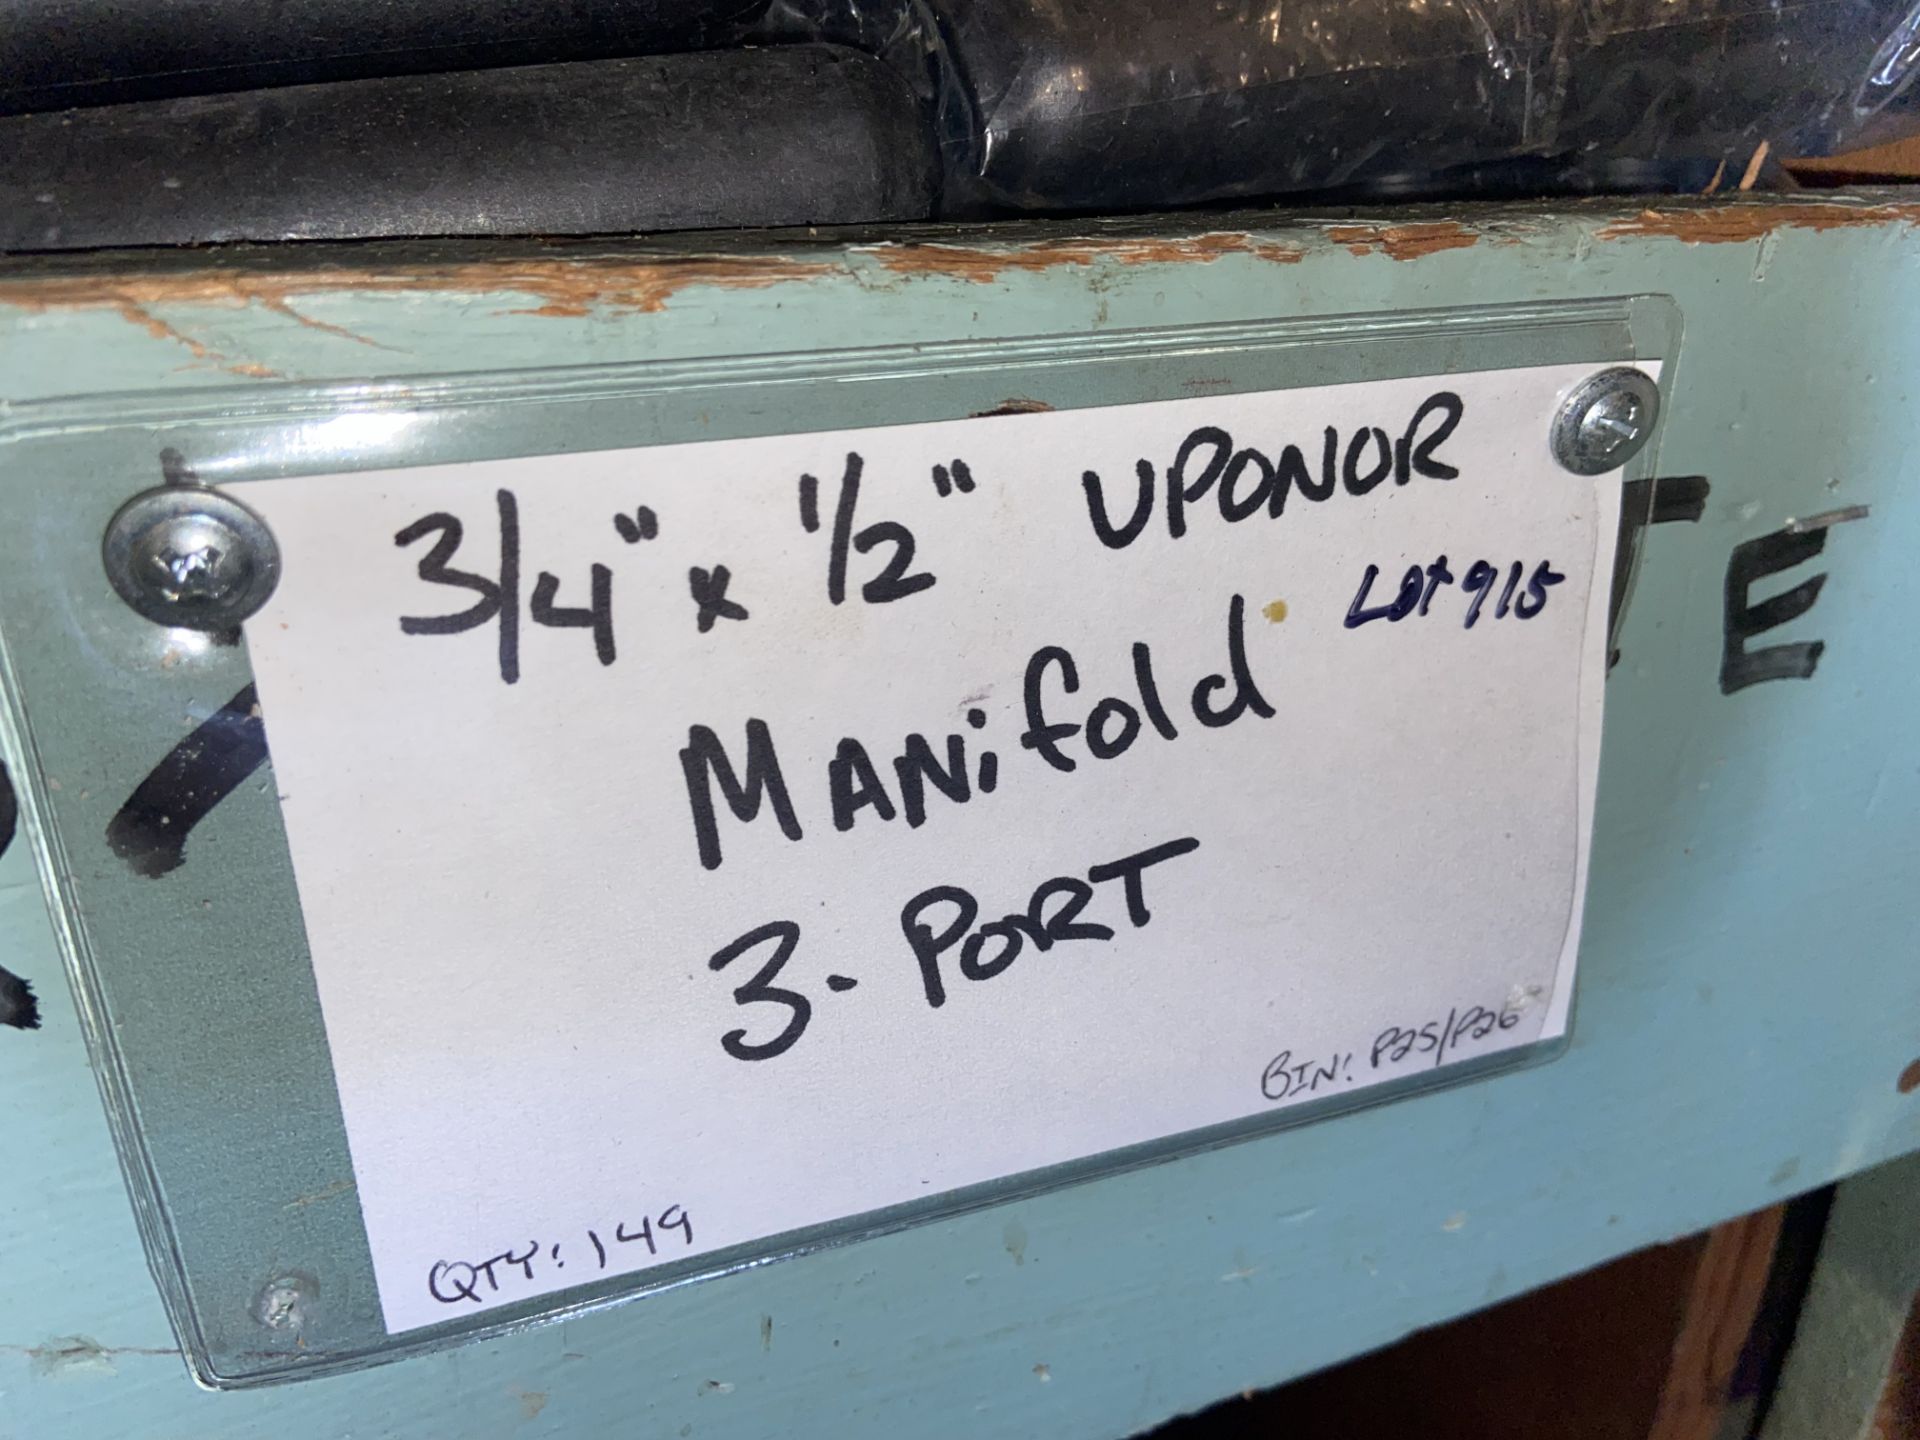 3/4”x1/2” Uponor Manifold 3 port (Bin:P25,P26) (LOCATED IN MONROEVILLE, PA) - Image 2 of 2